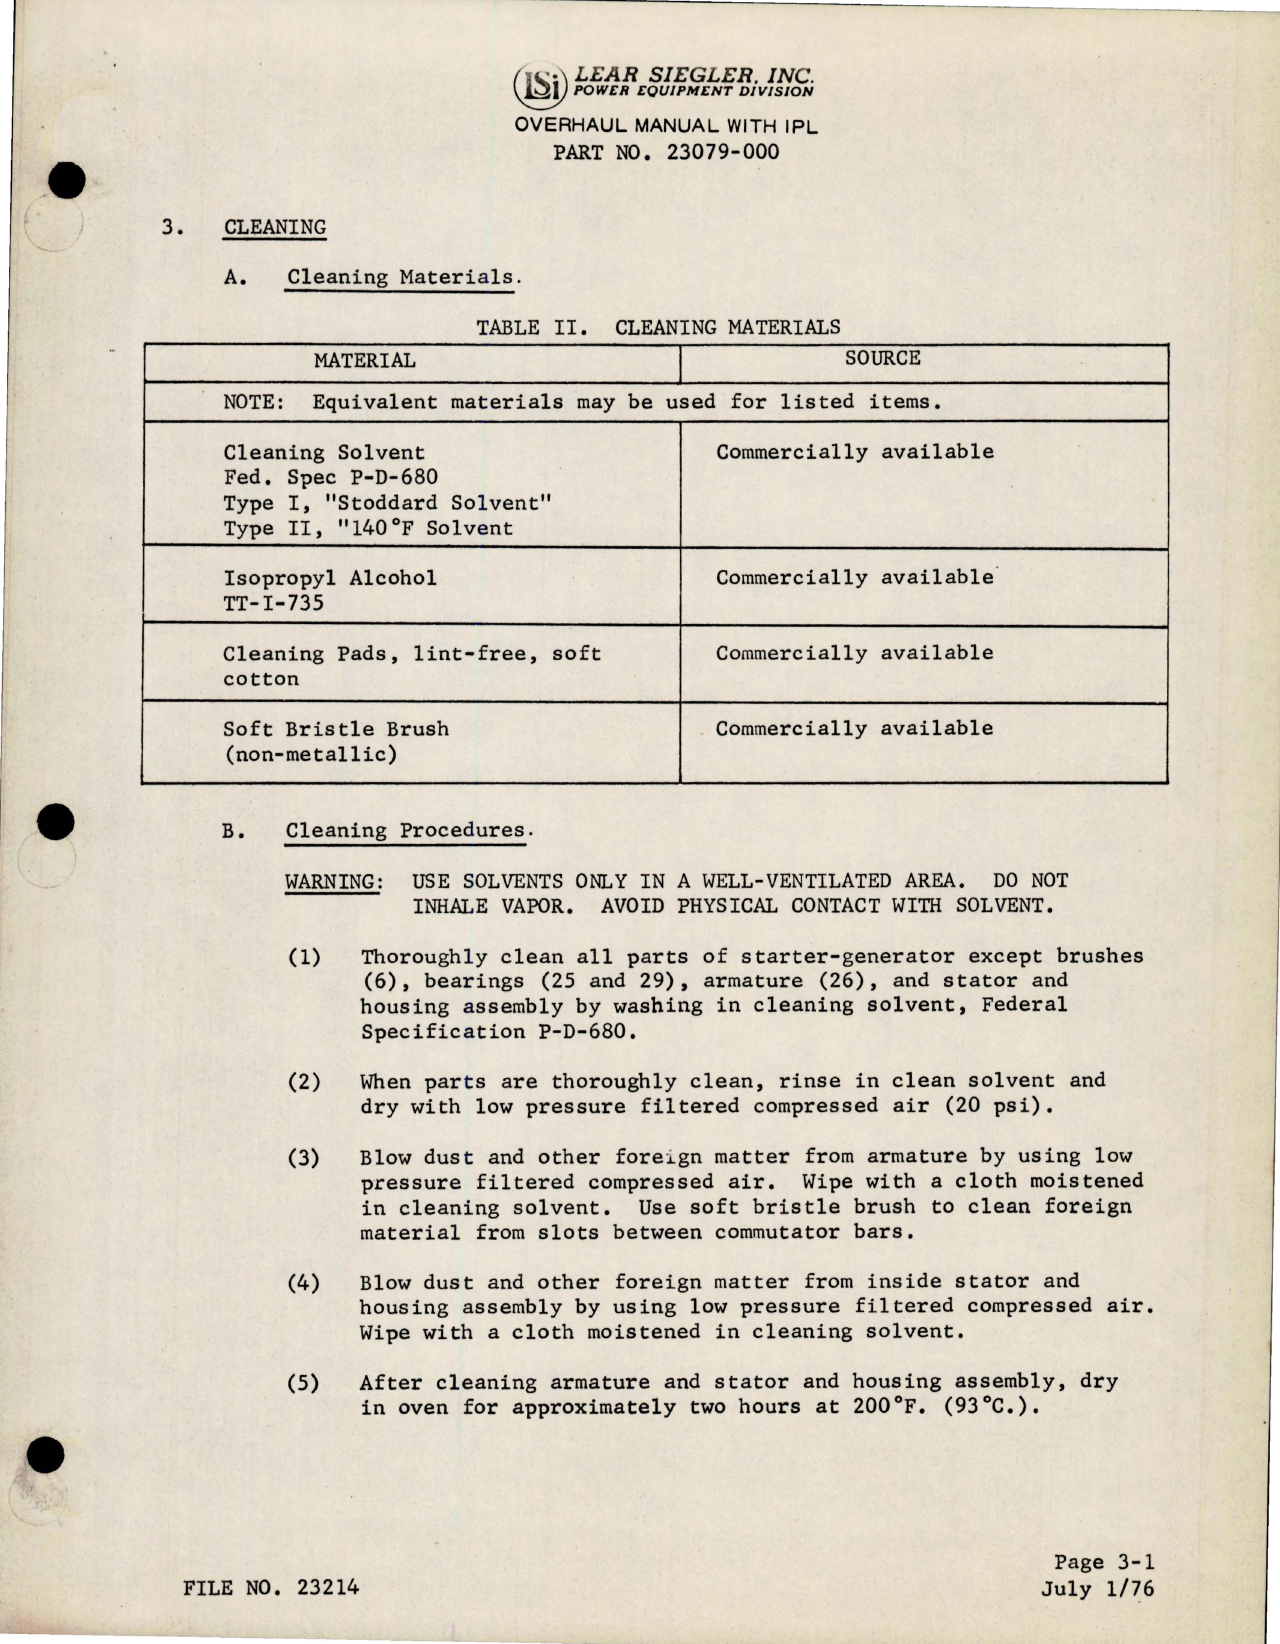 Sample page 9 from AirCorps Library document: Overhaul with Illustrated Parts List for Starter Generator - Model 23079-000 